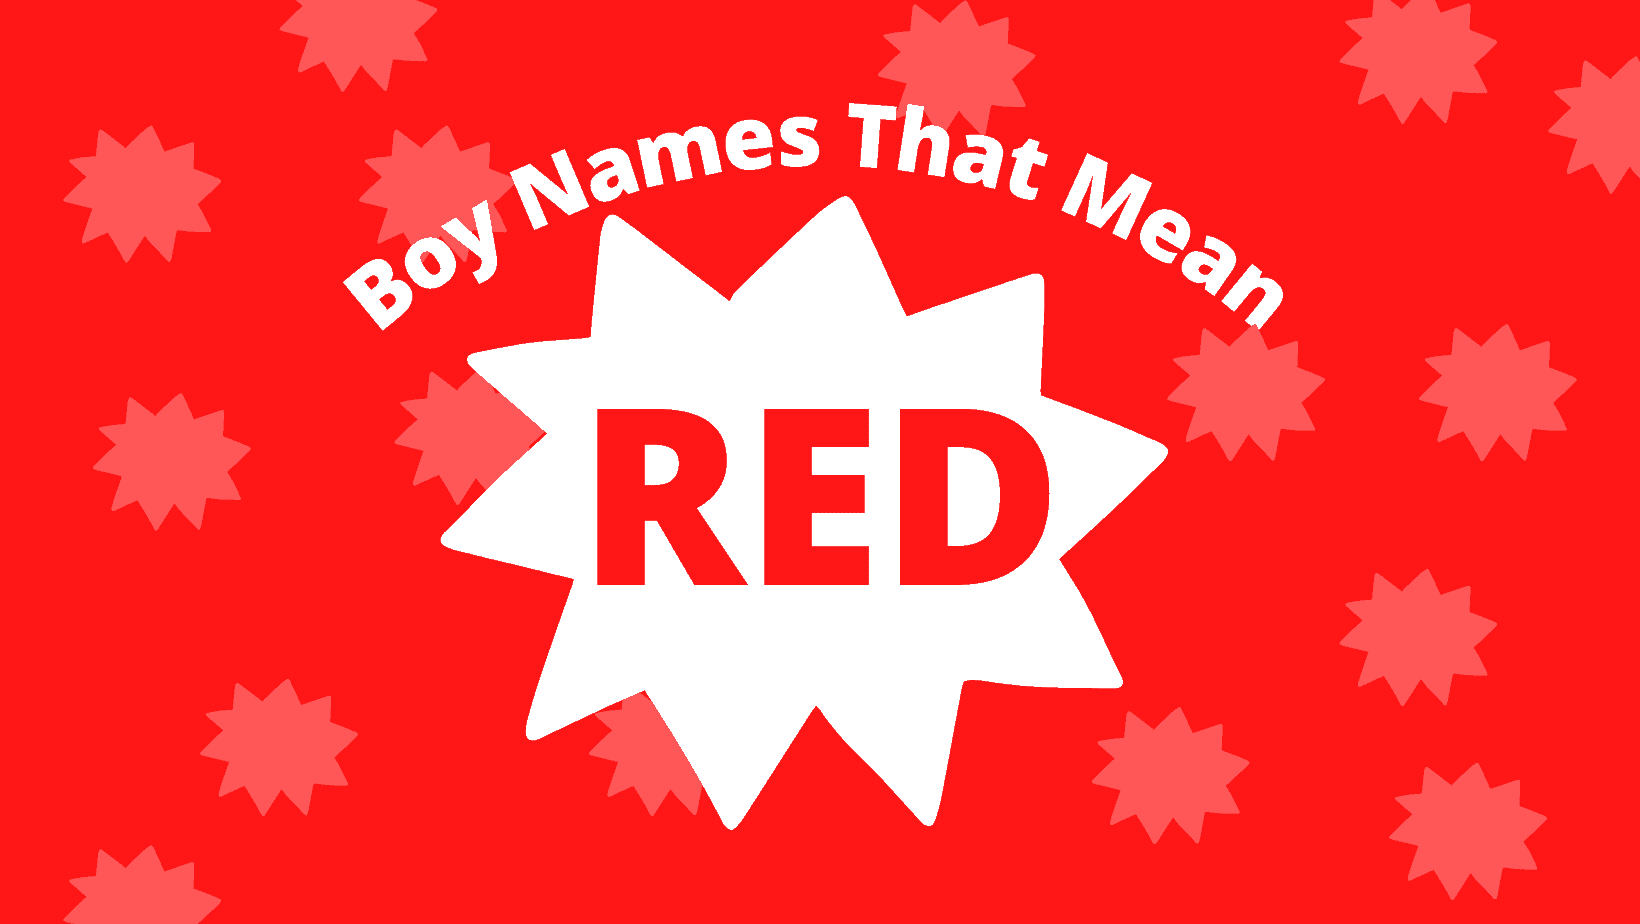 Boy names that mean red